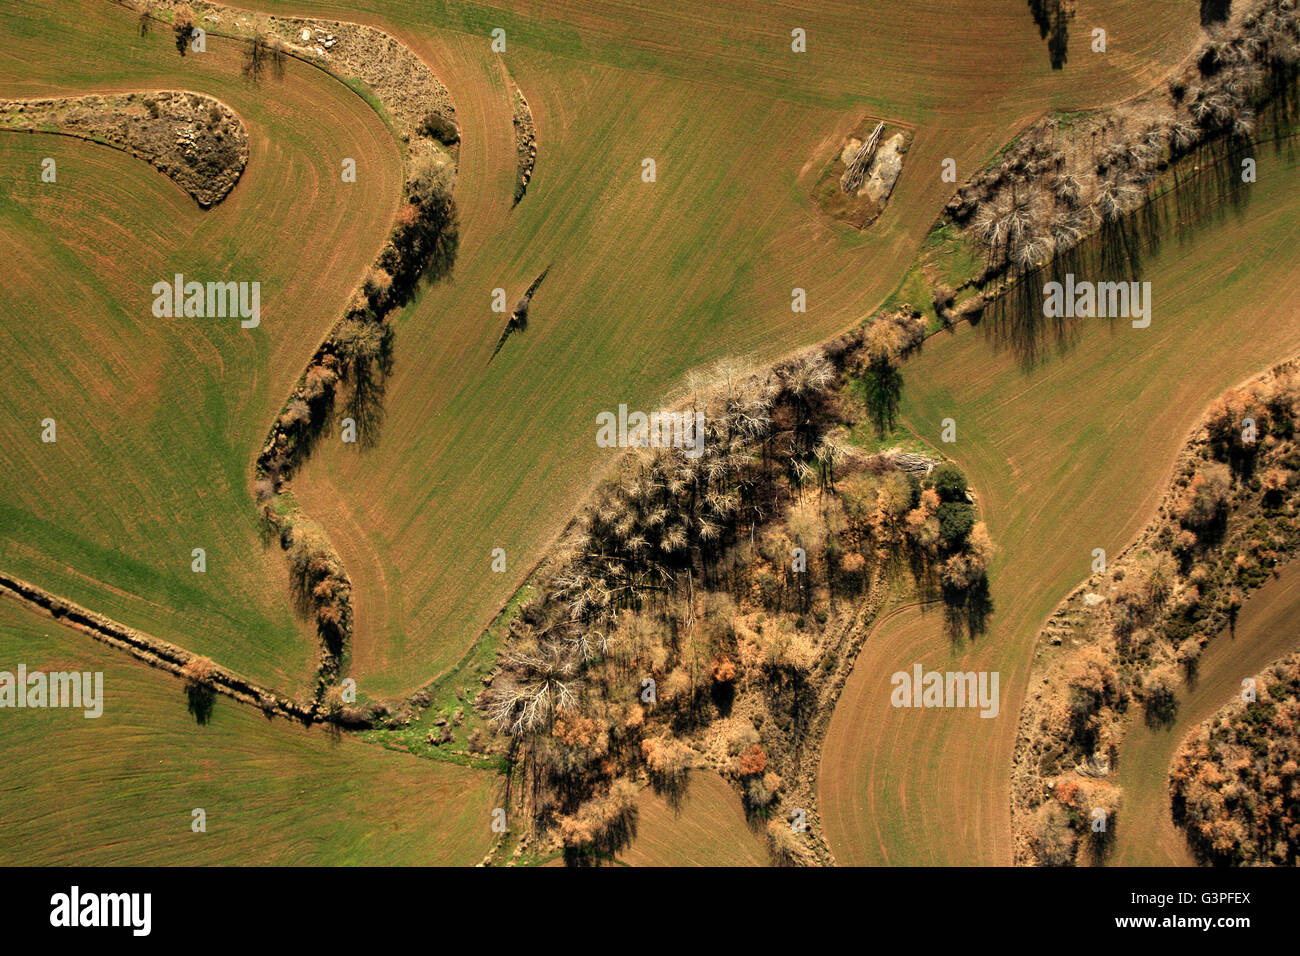 Field and forest, aerial view. Plana de Vic. Barcelona province. Catalonia. Spain Stock Photo